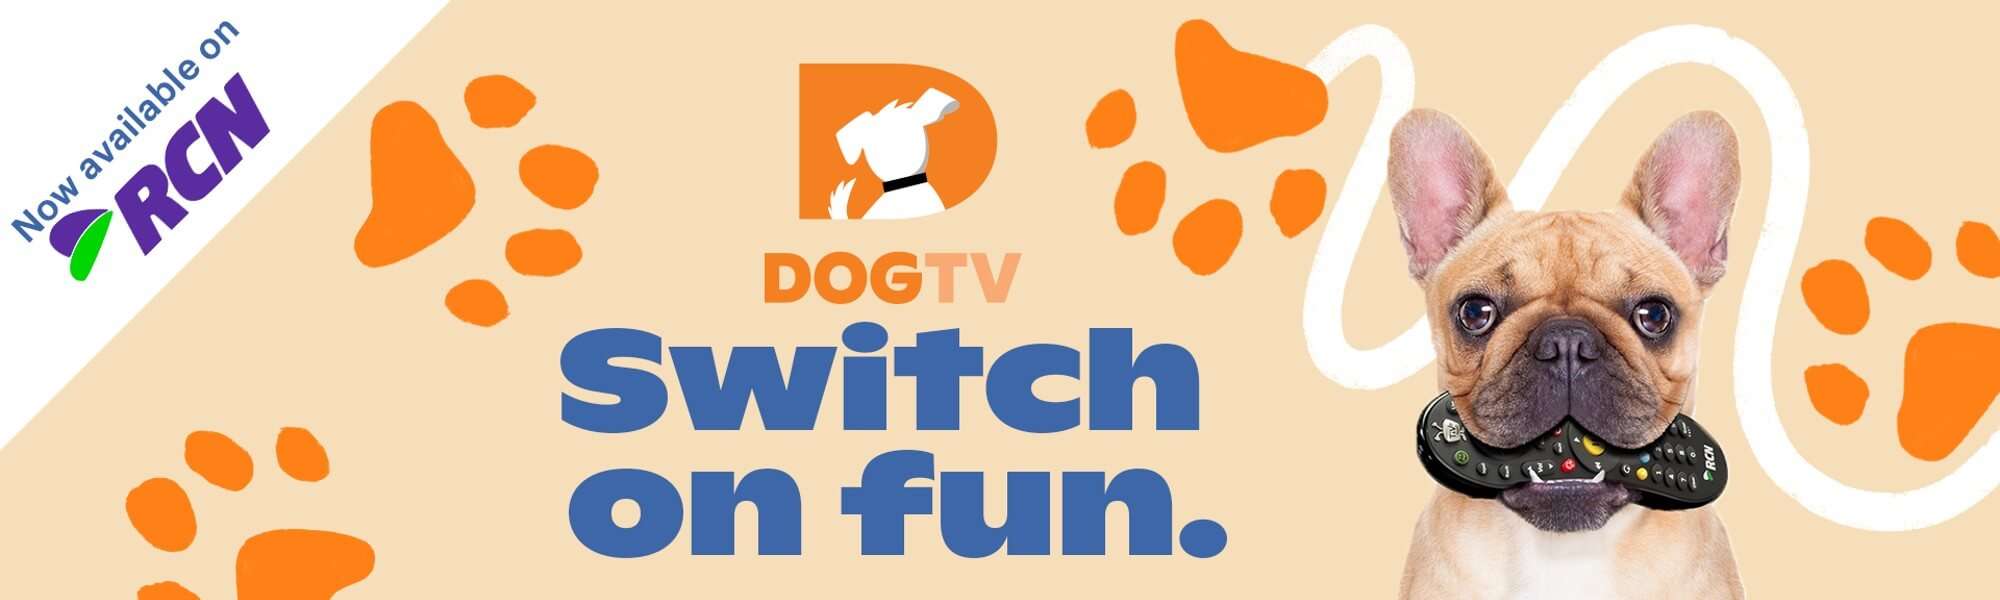 DOGTV - The First TV Channel For Dogs | Astound Broadband | Meet Our  Companies: RCN, Grande, Wave, & enTouch